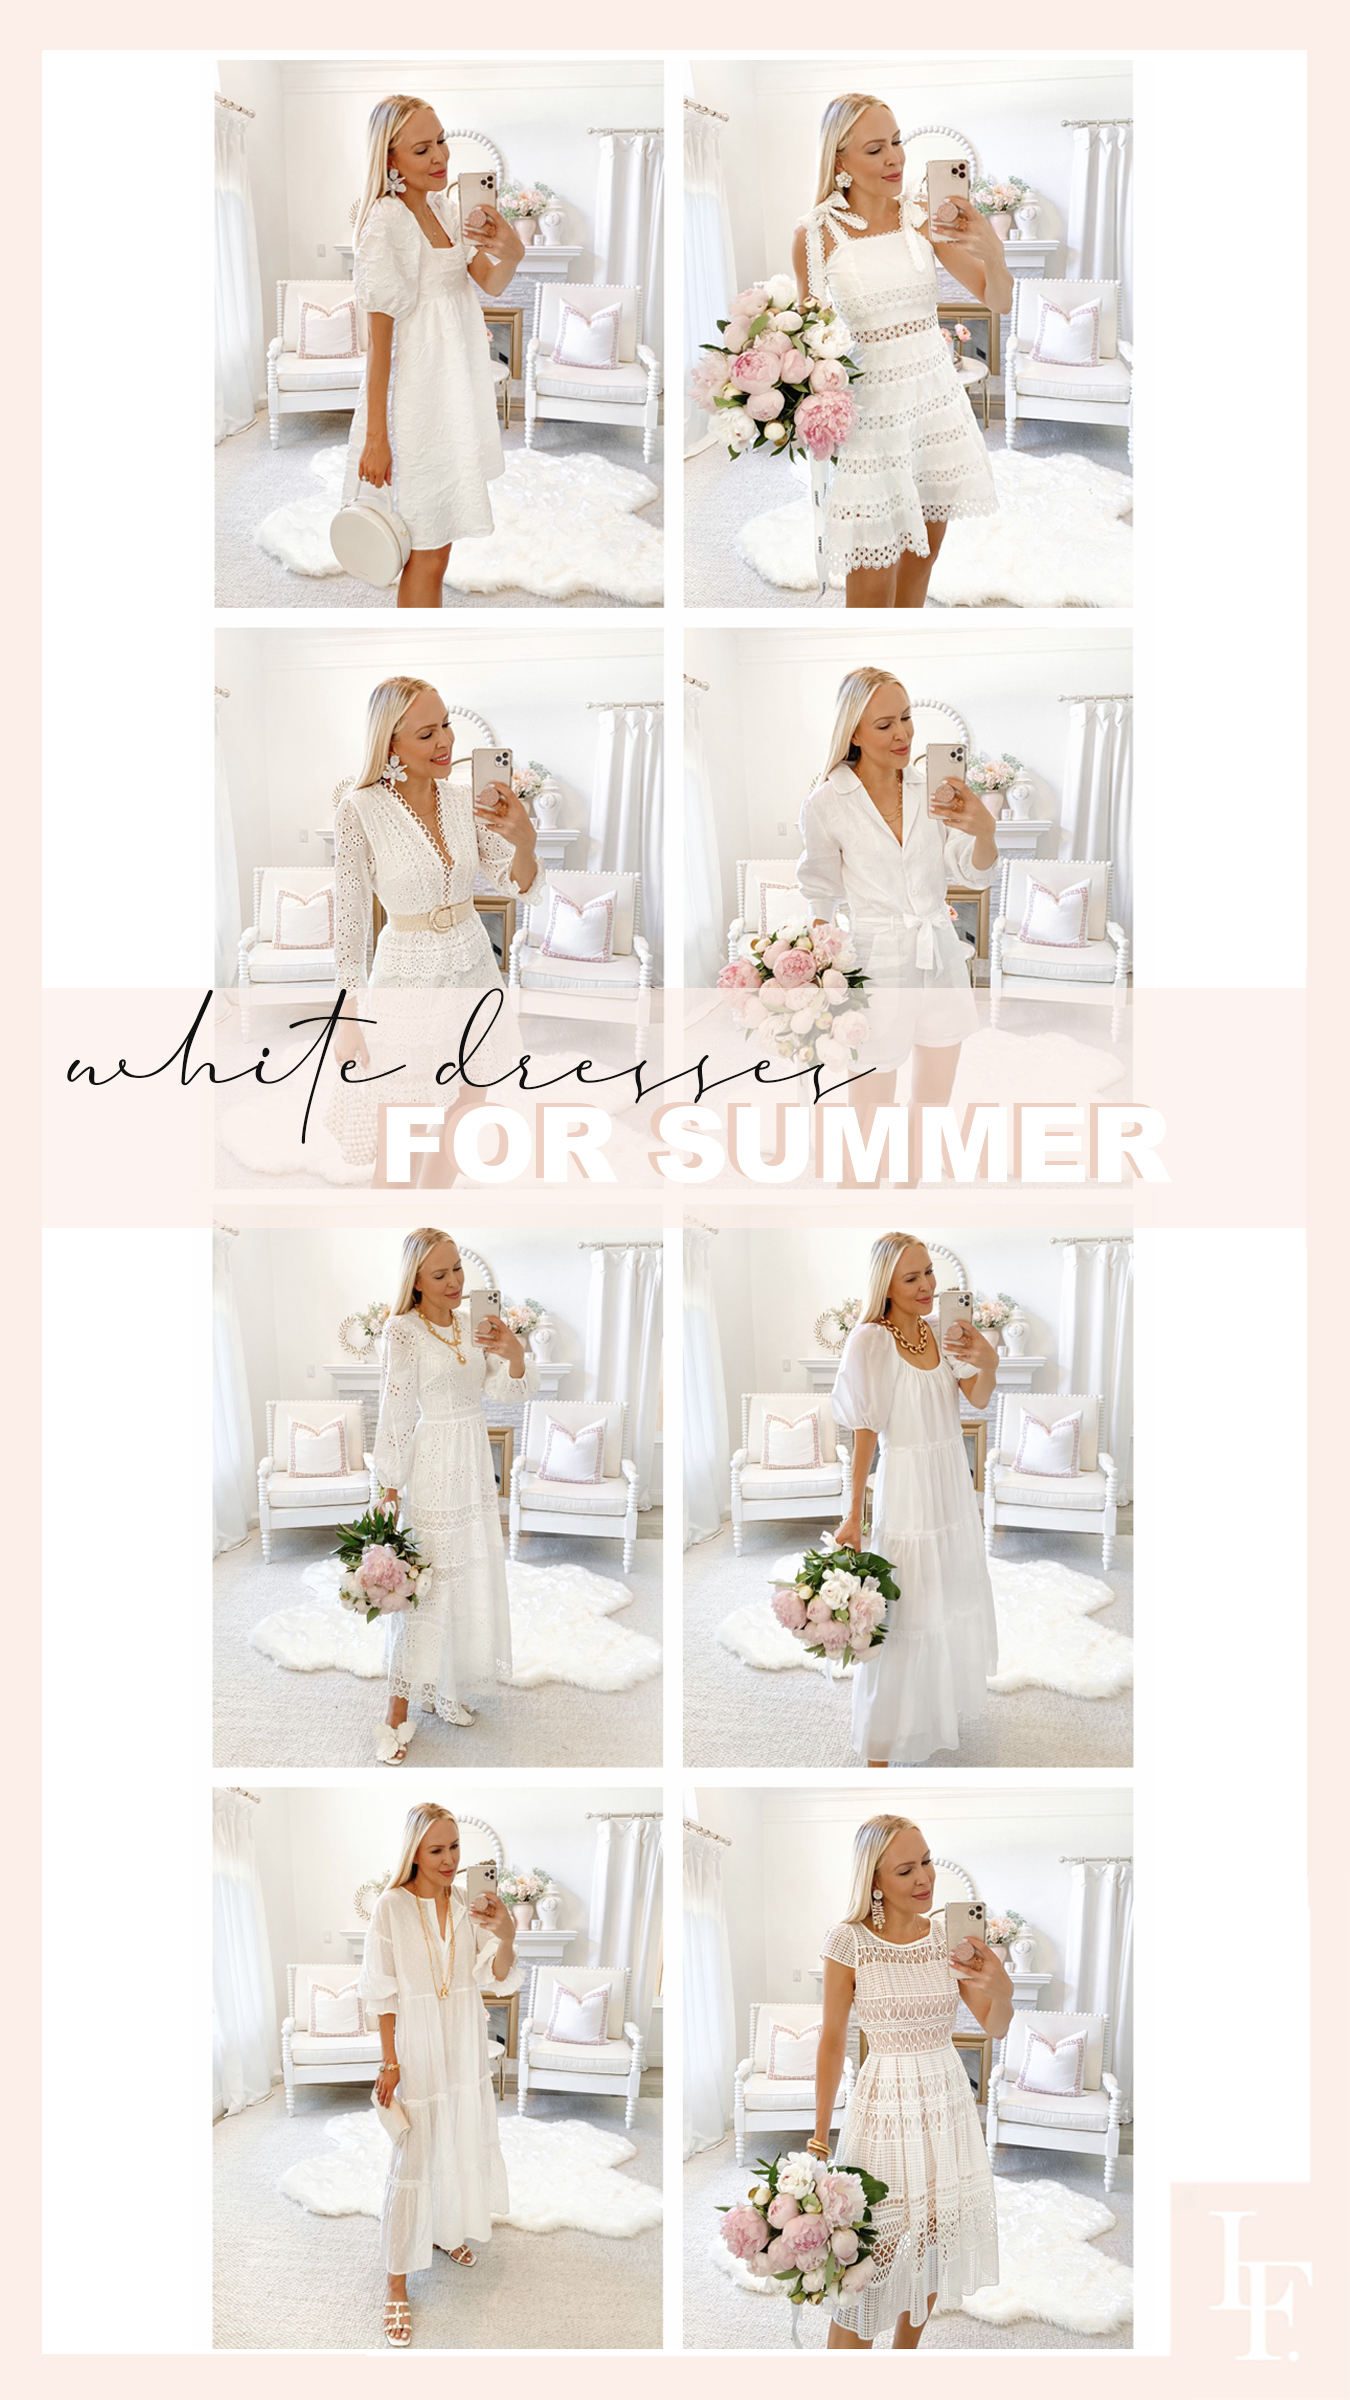 White dress style inspiration for summer, by Lombard & Fifth Veronica Levy.